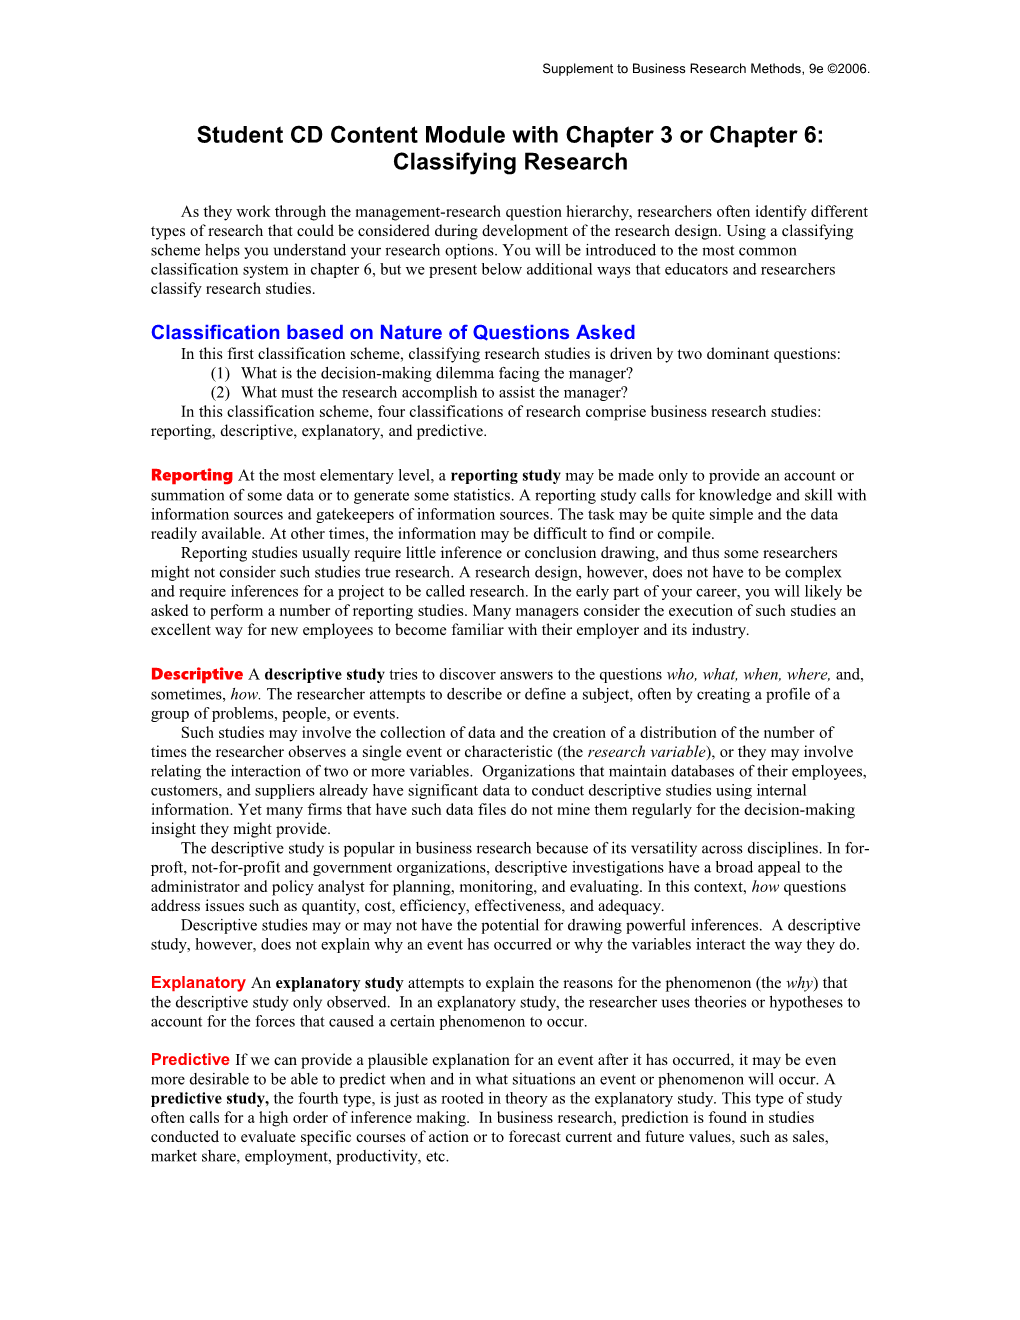 Content Module with Chapter 3: Classifying Research